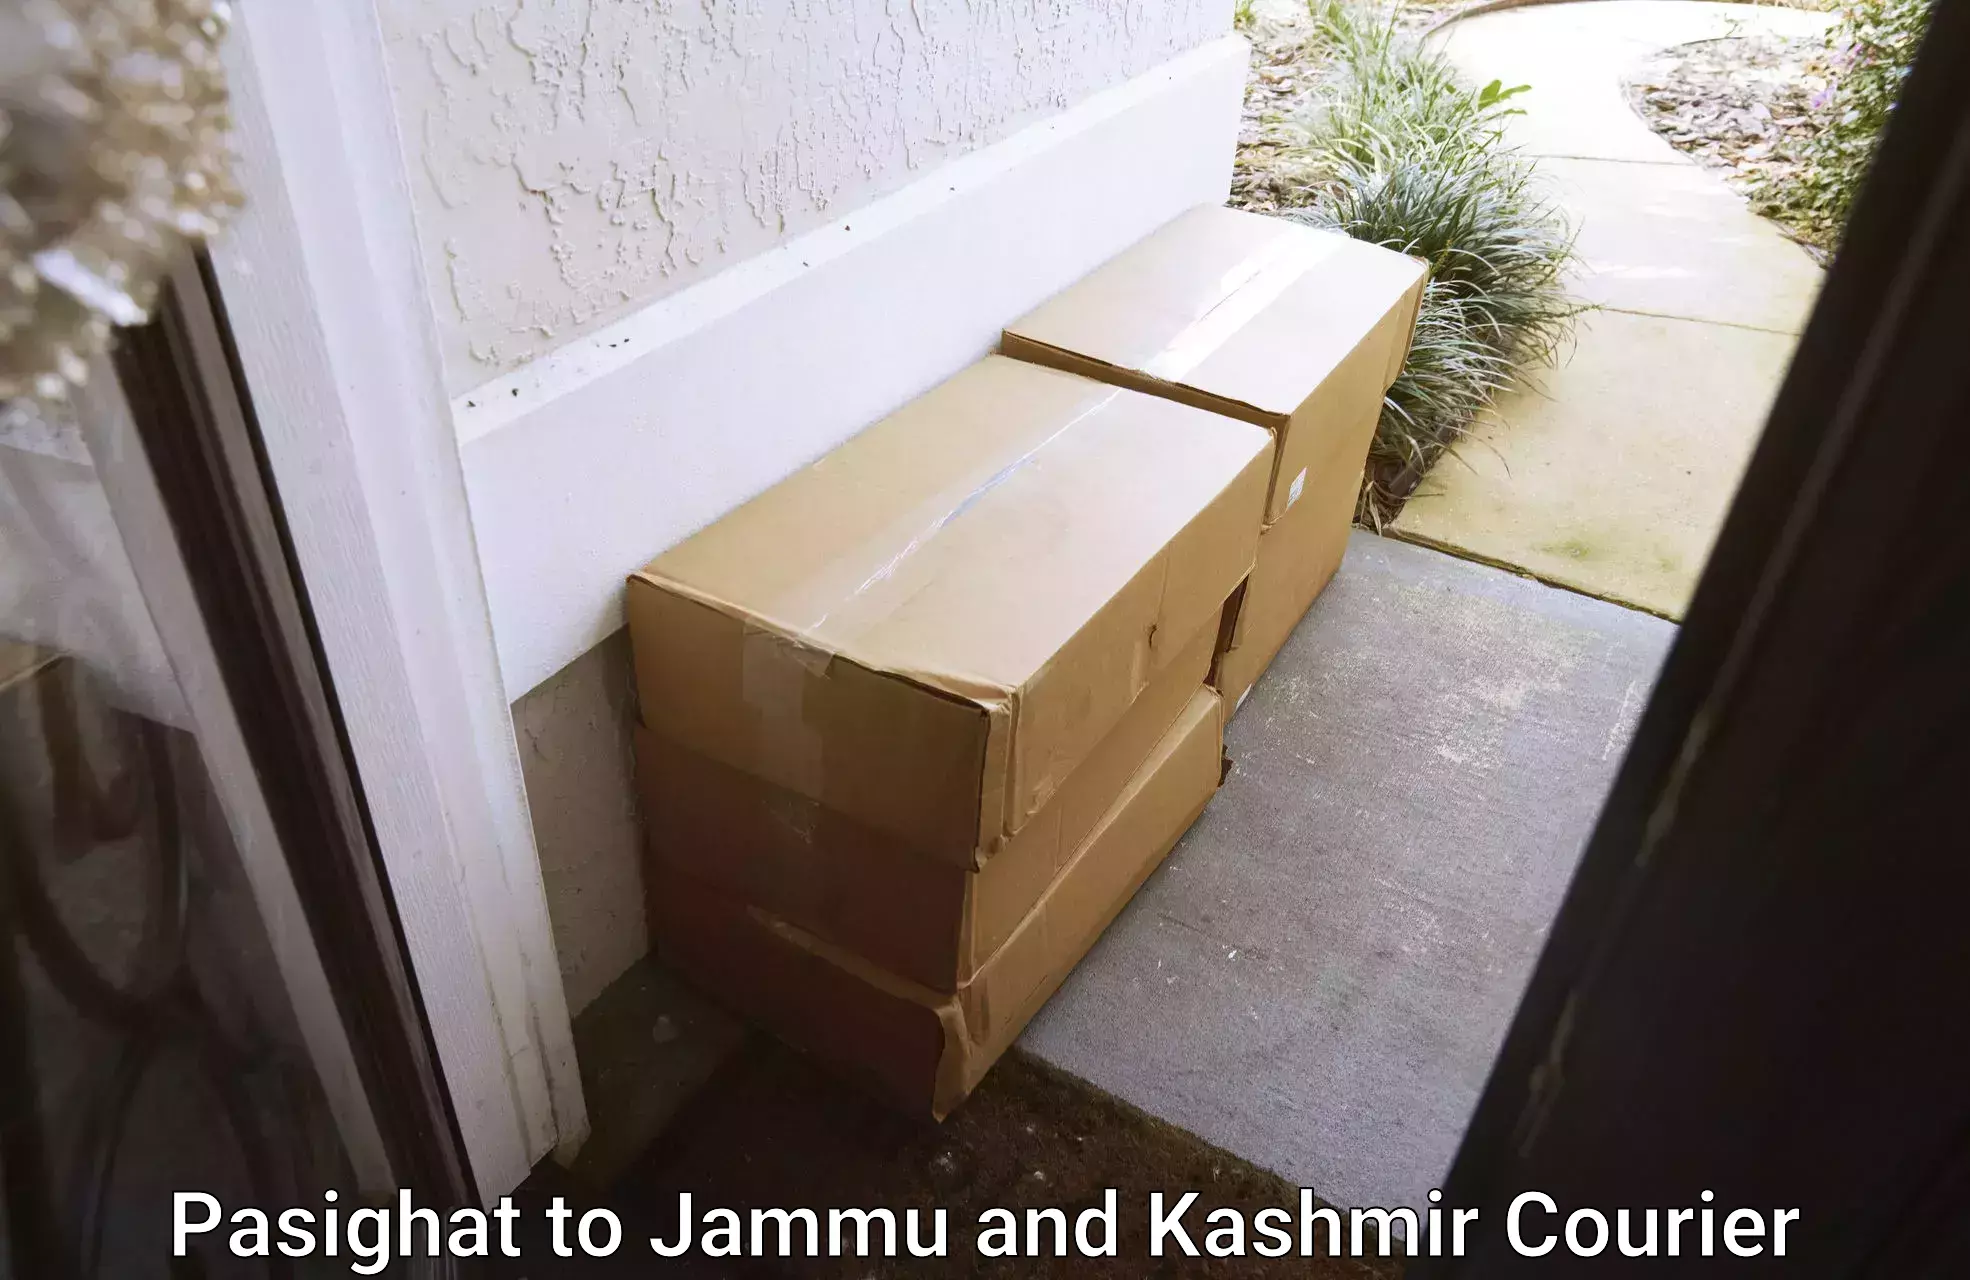 Large package courier Pasighat to Shopian